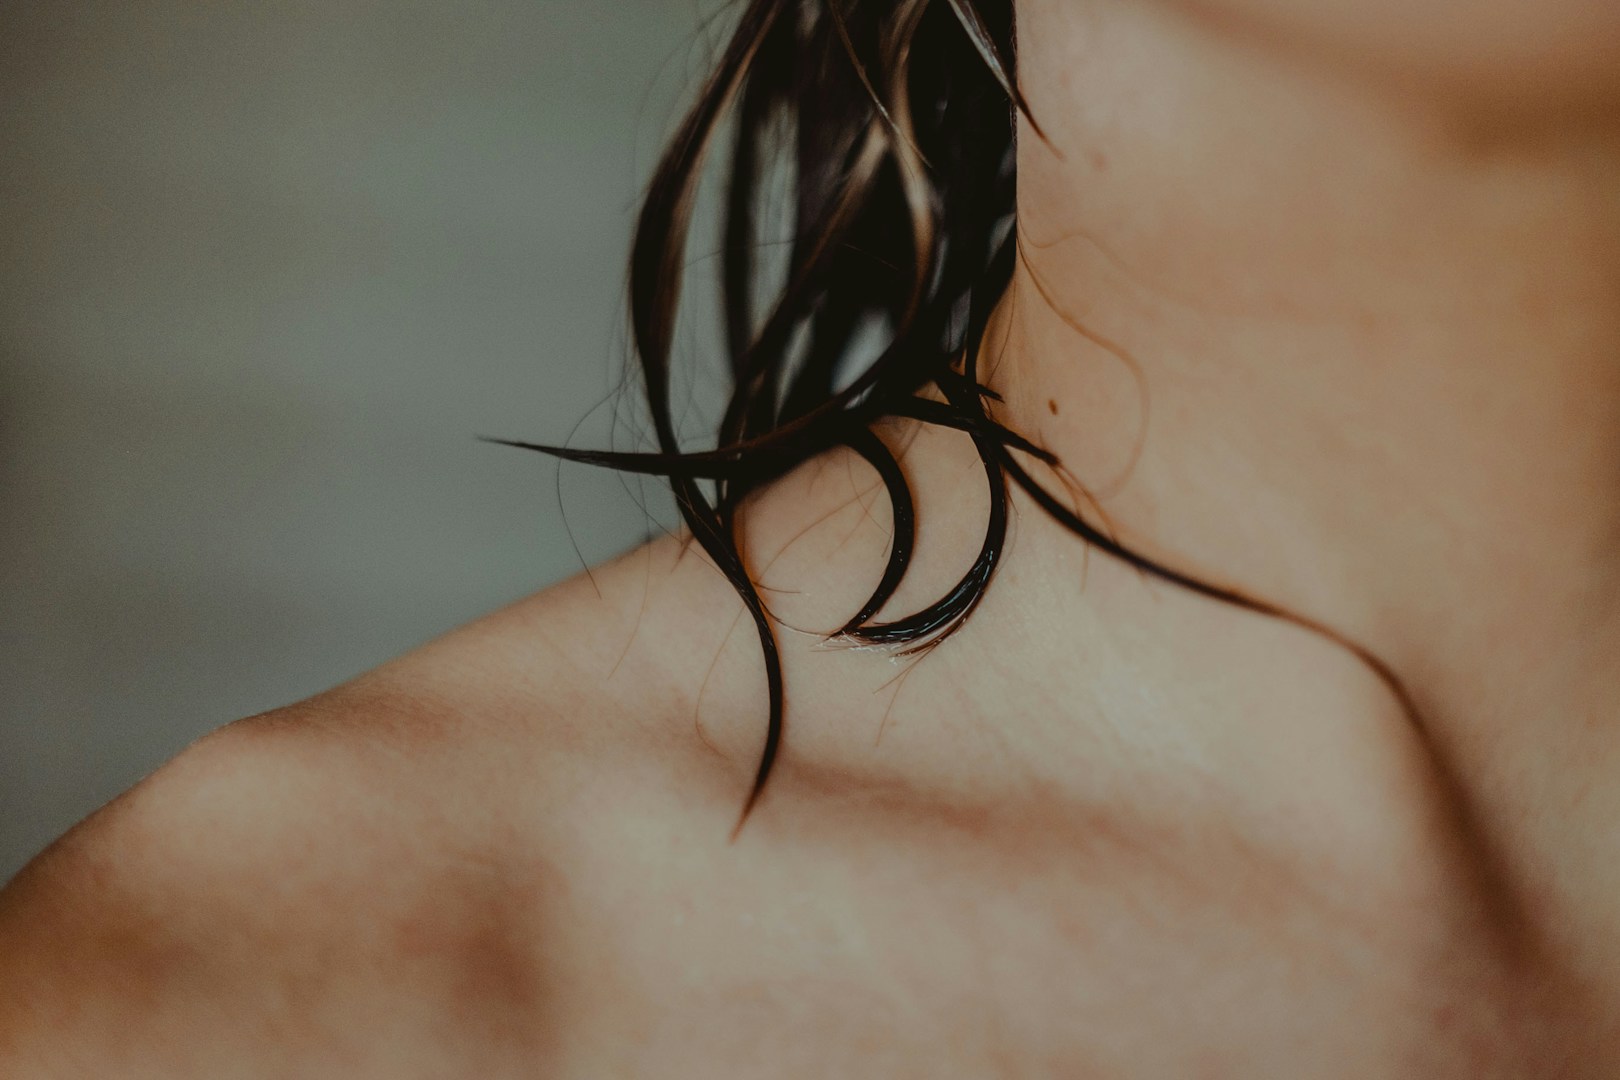 woman's neck and collarbone with wet hair